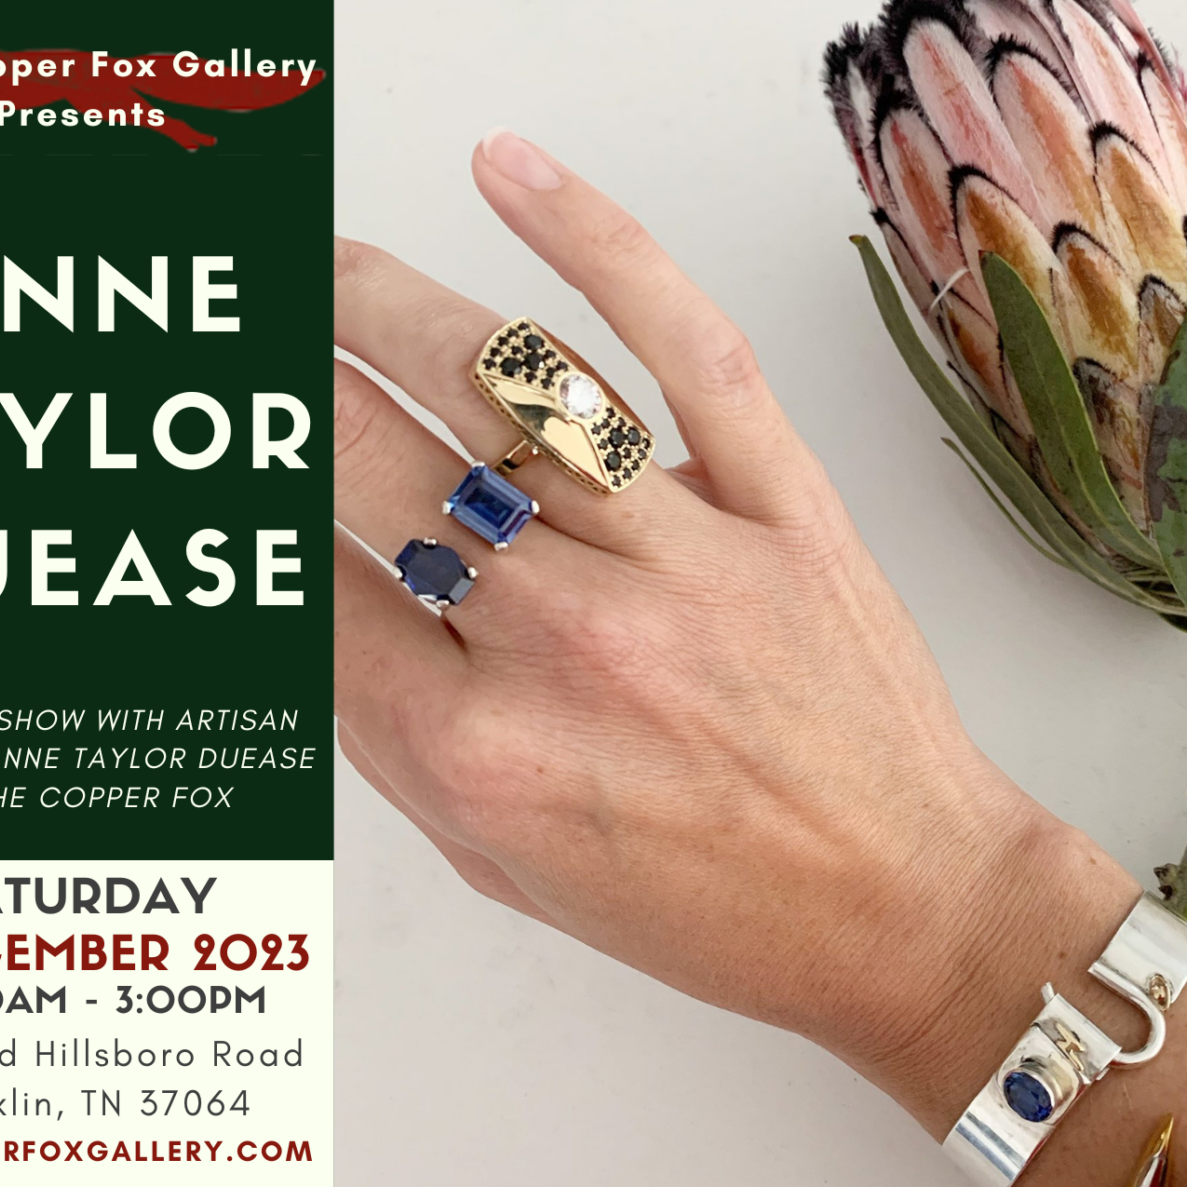 The Copper Fox Trunk show with jeweler Anne Taylor Duease. December 2nd, 11-3